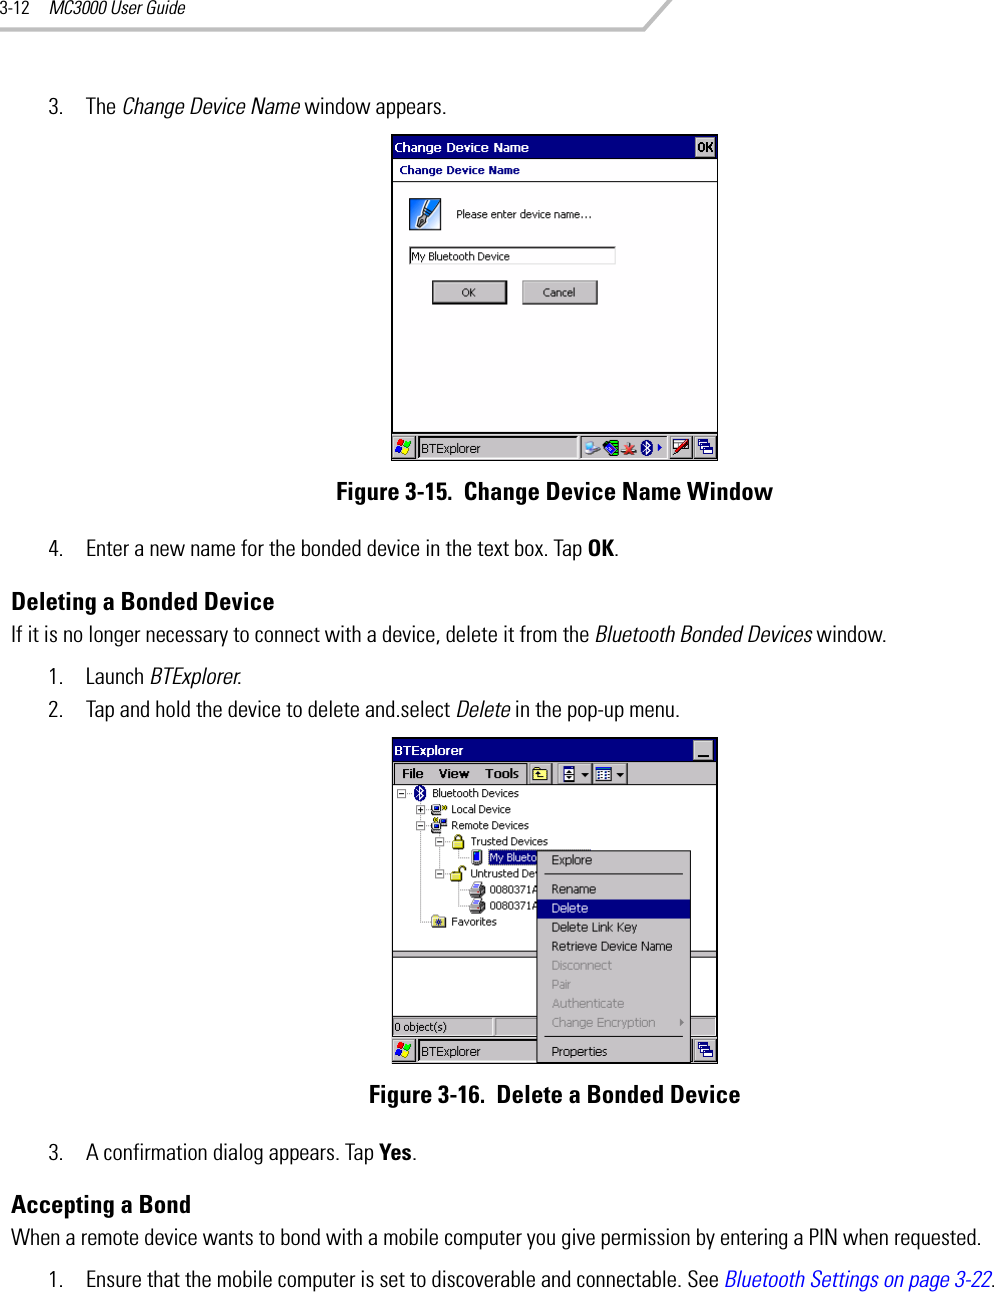 MC3000 User Guide3-123. The Change Device Name window appears.Figure 3-15.  Change Device Name Window4. Enter a new name for the bonded device in the text box. Tap OK.Deleting a Bonded DeviceIf it is no longer necessary to connect with a device, delete it from the Bluetooth Bonded Devices window.1. Launch BTExplorer.2. Tap and hold the device to delete and.select Delete in the pop-up menu.Figure 3-16.  Delete a Bonded Device3. A confirmation dialog appears. Tap Yes.Accepting a BondWhen a remote device wants to bond with a mobile computer you give permission by entering a PIN when requested.1. Ensure that the mobile computer is set to discoverable and connectable. See Bluetooth Settings on page 3-22.